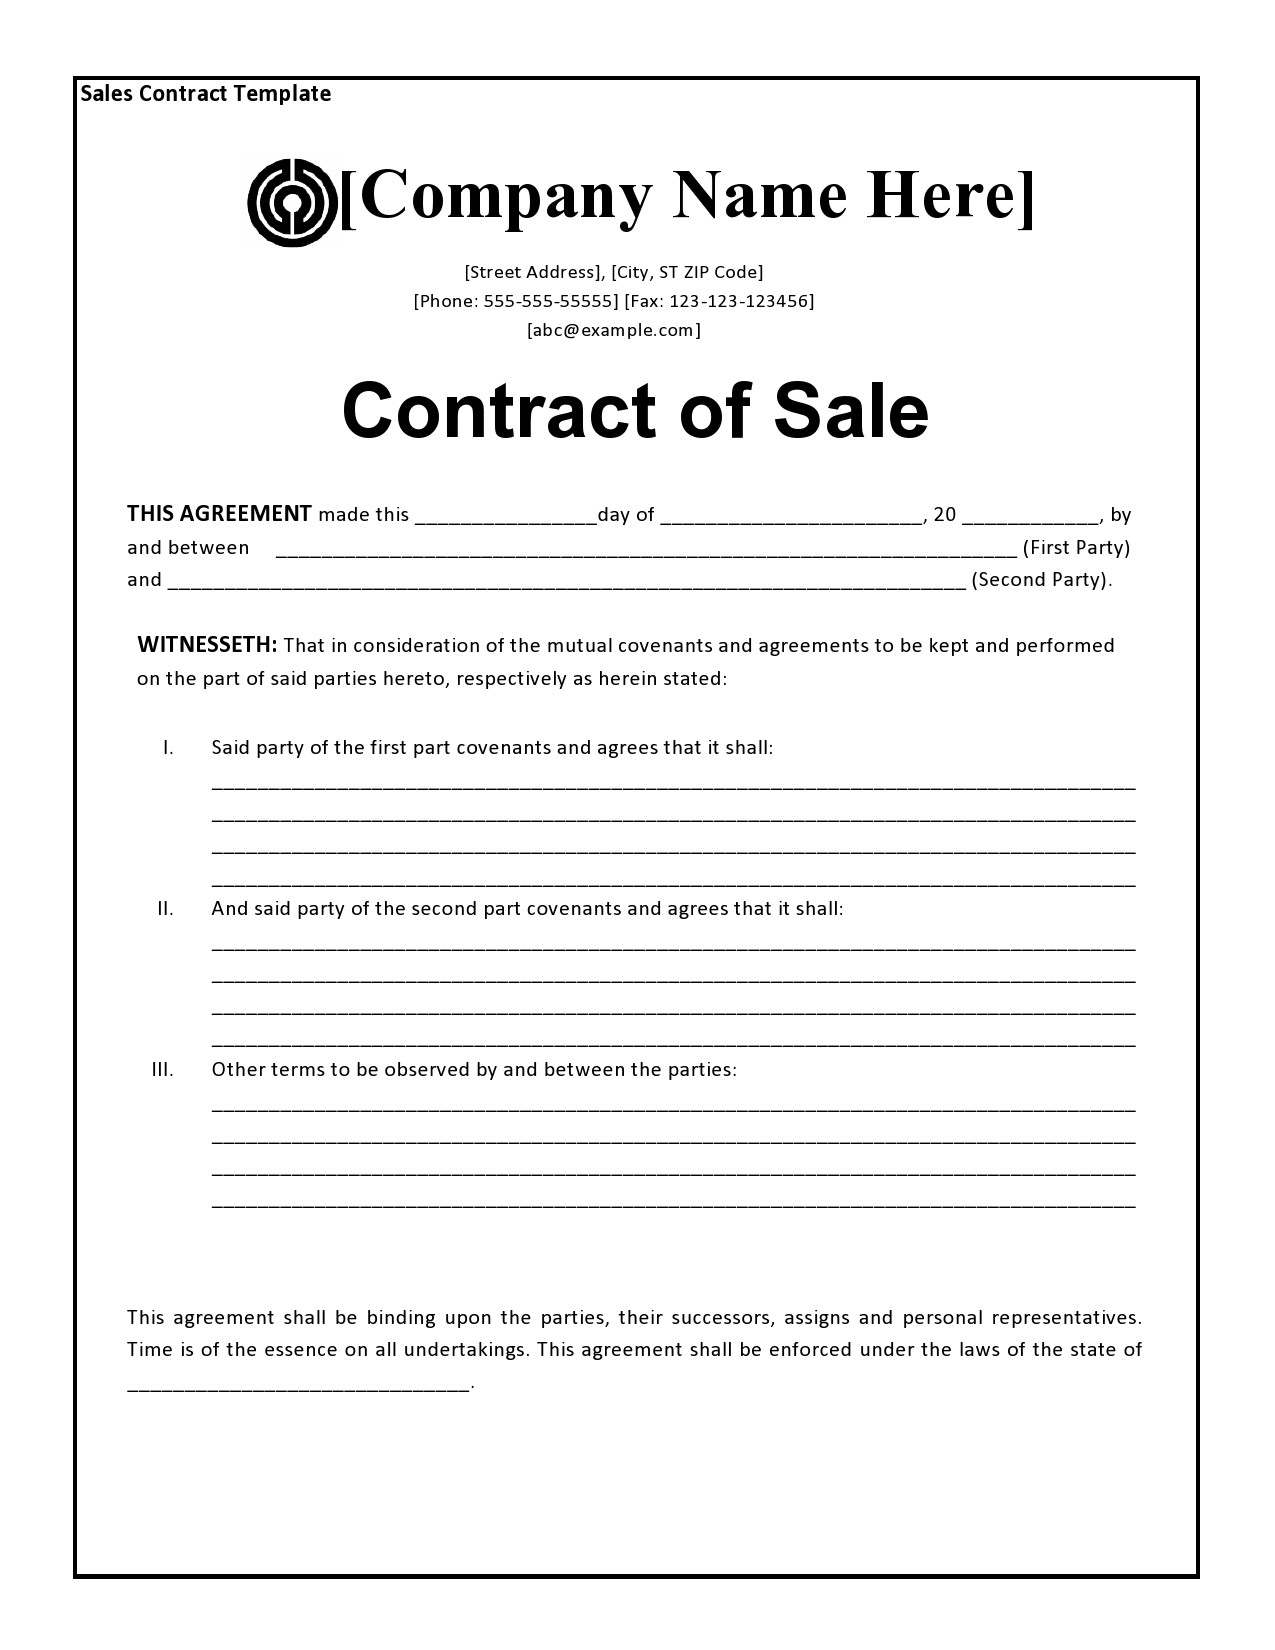 Free sales contract template 08